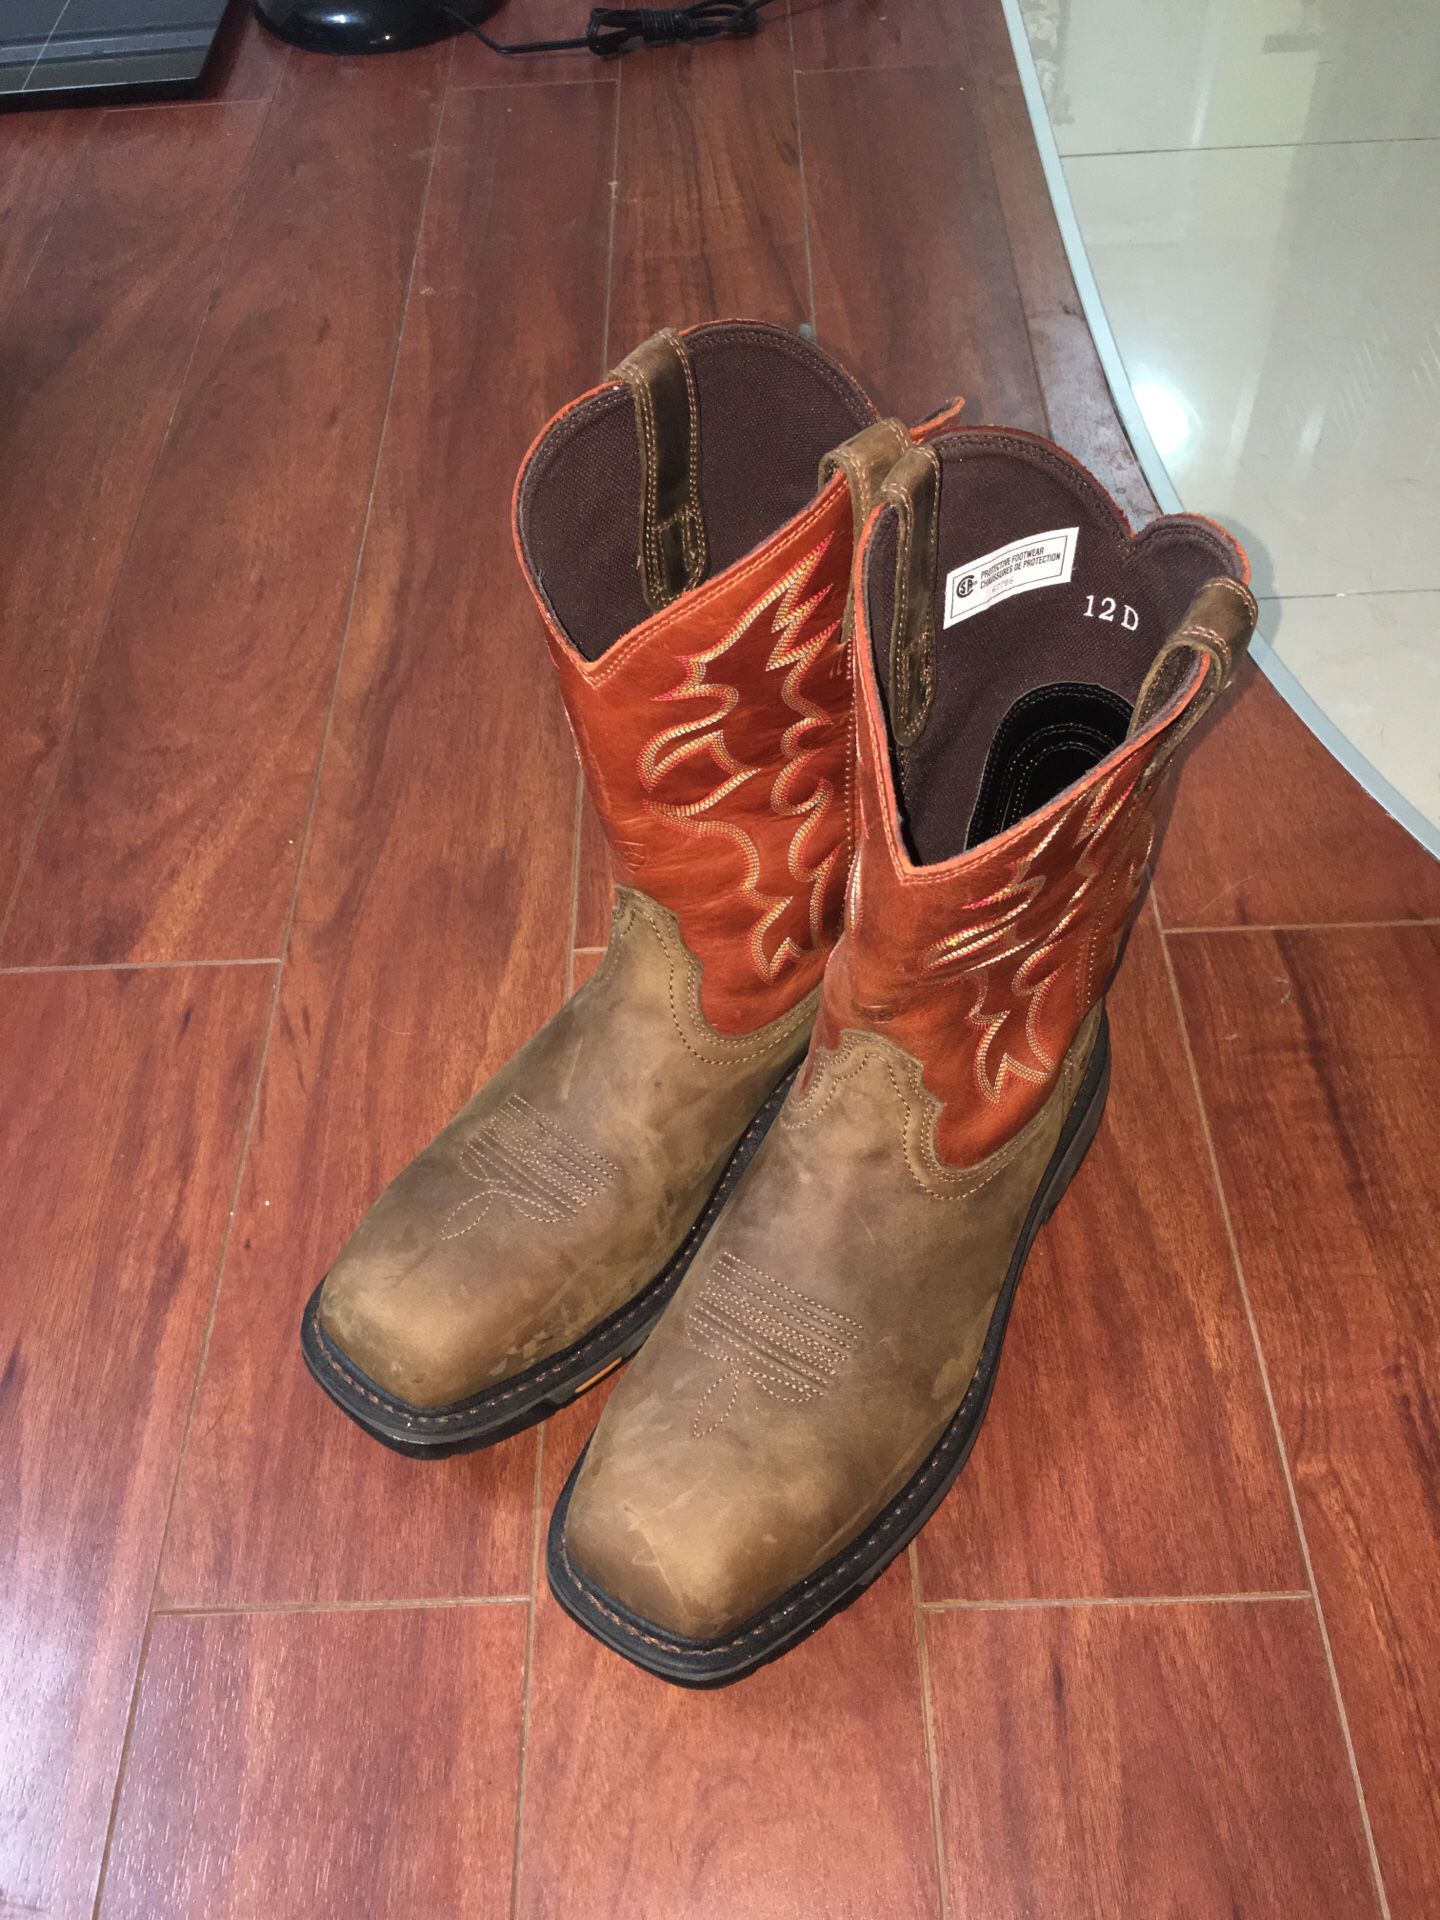 Ariat Boots size 12